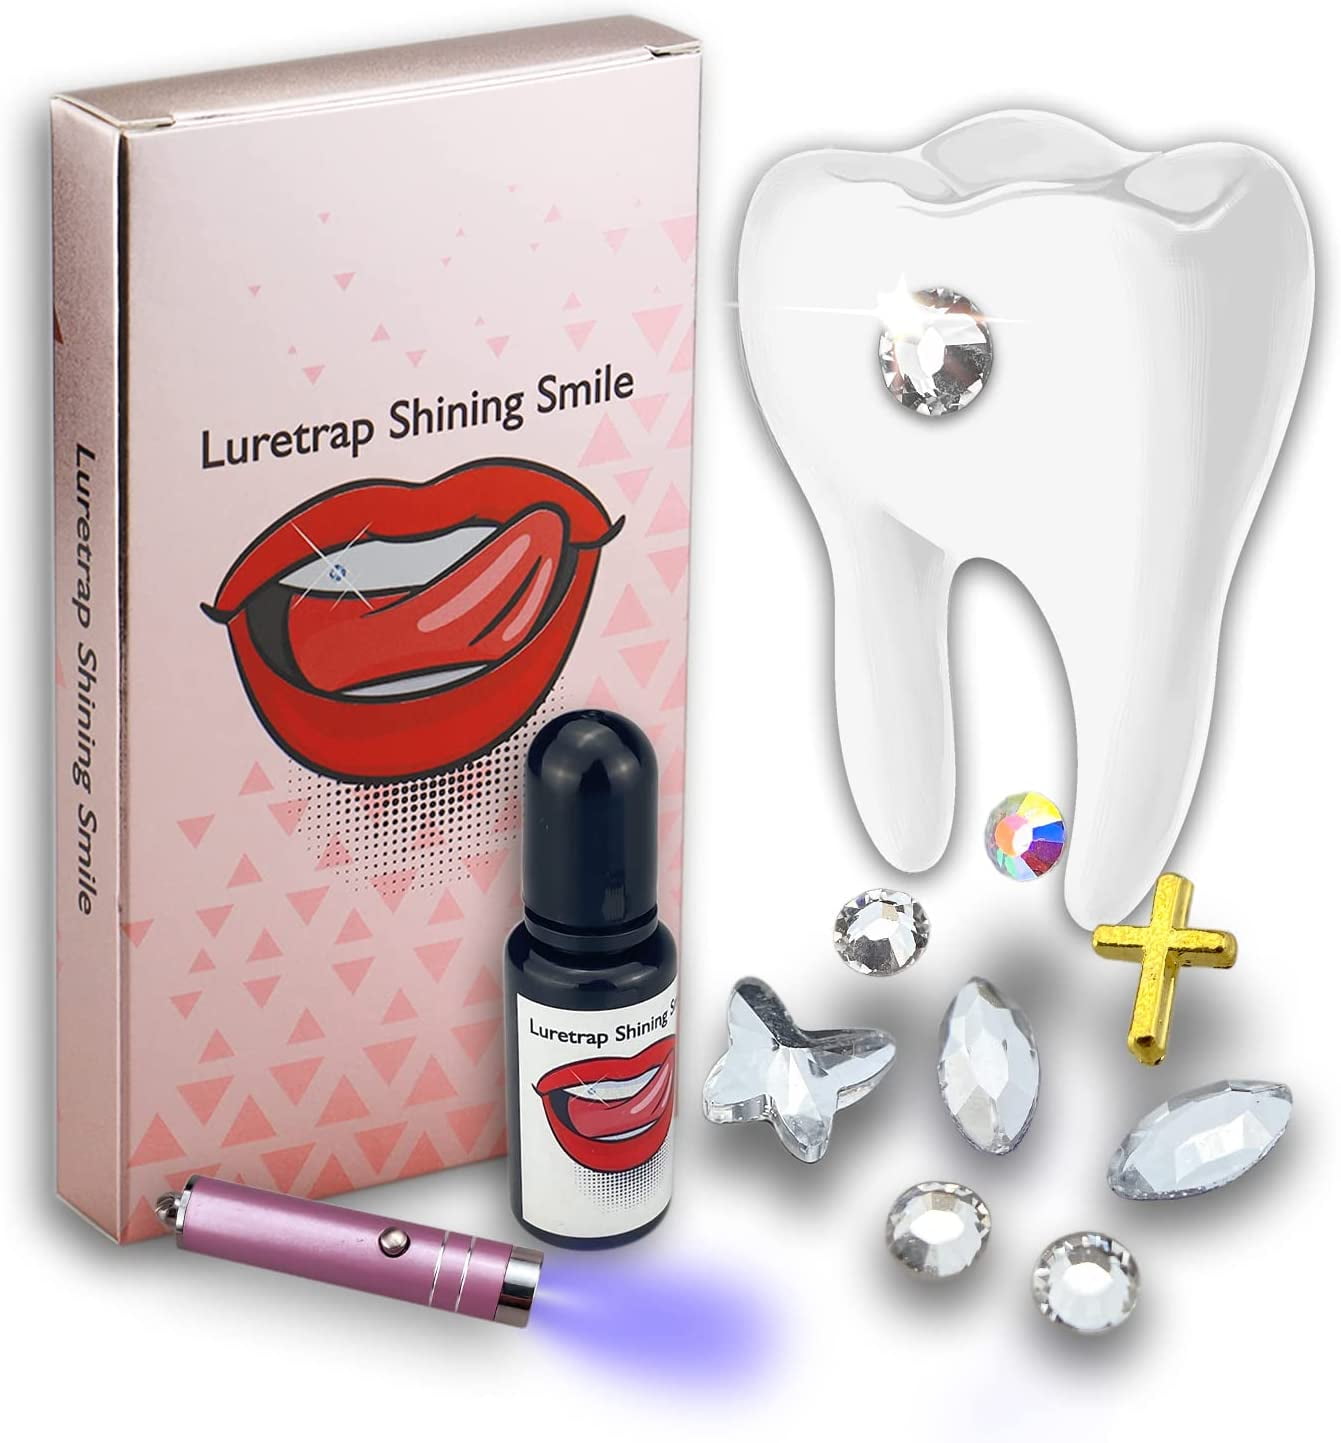 Smrinog 35pcs Tooth Gem Kit with Curing Light and Glue, 1.5mm-3.8mm Dental Tooth Crystal Set, DIY Removable Teeth Jewelry Artificial Crystal Tooth